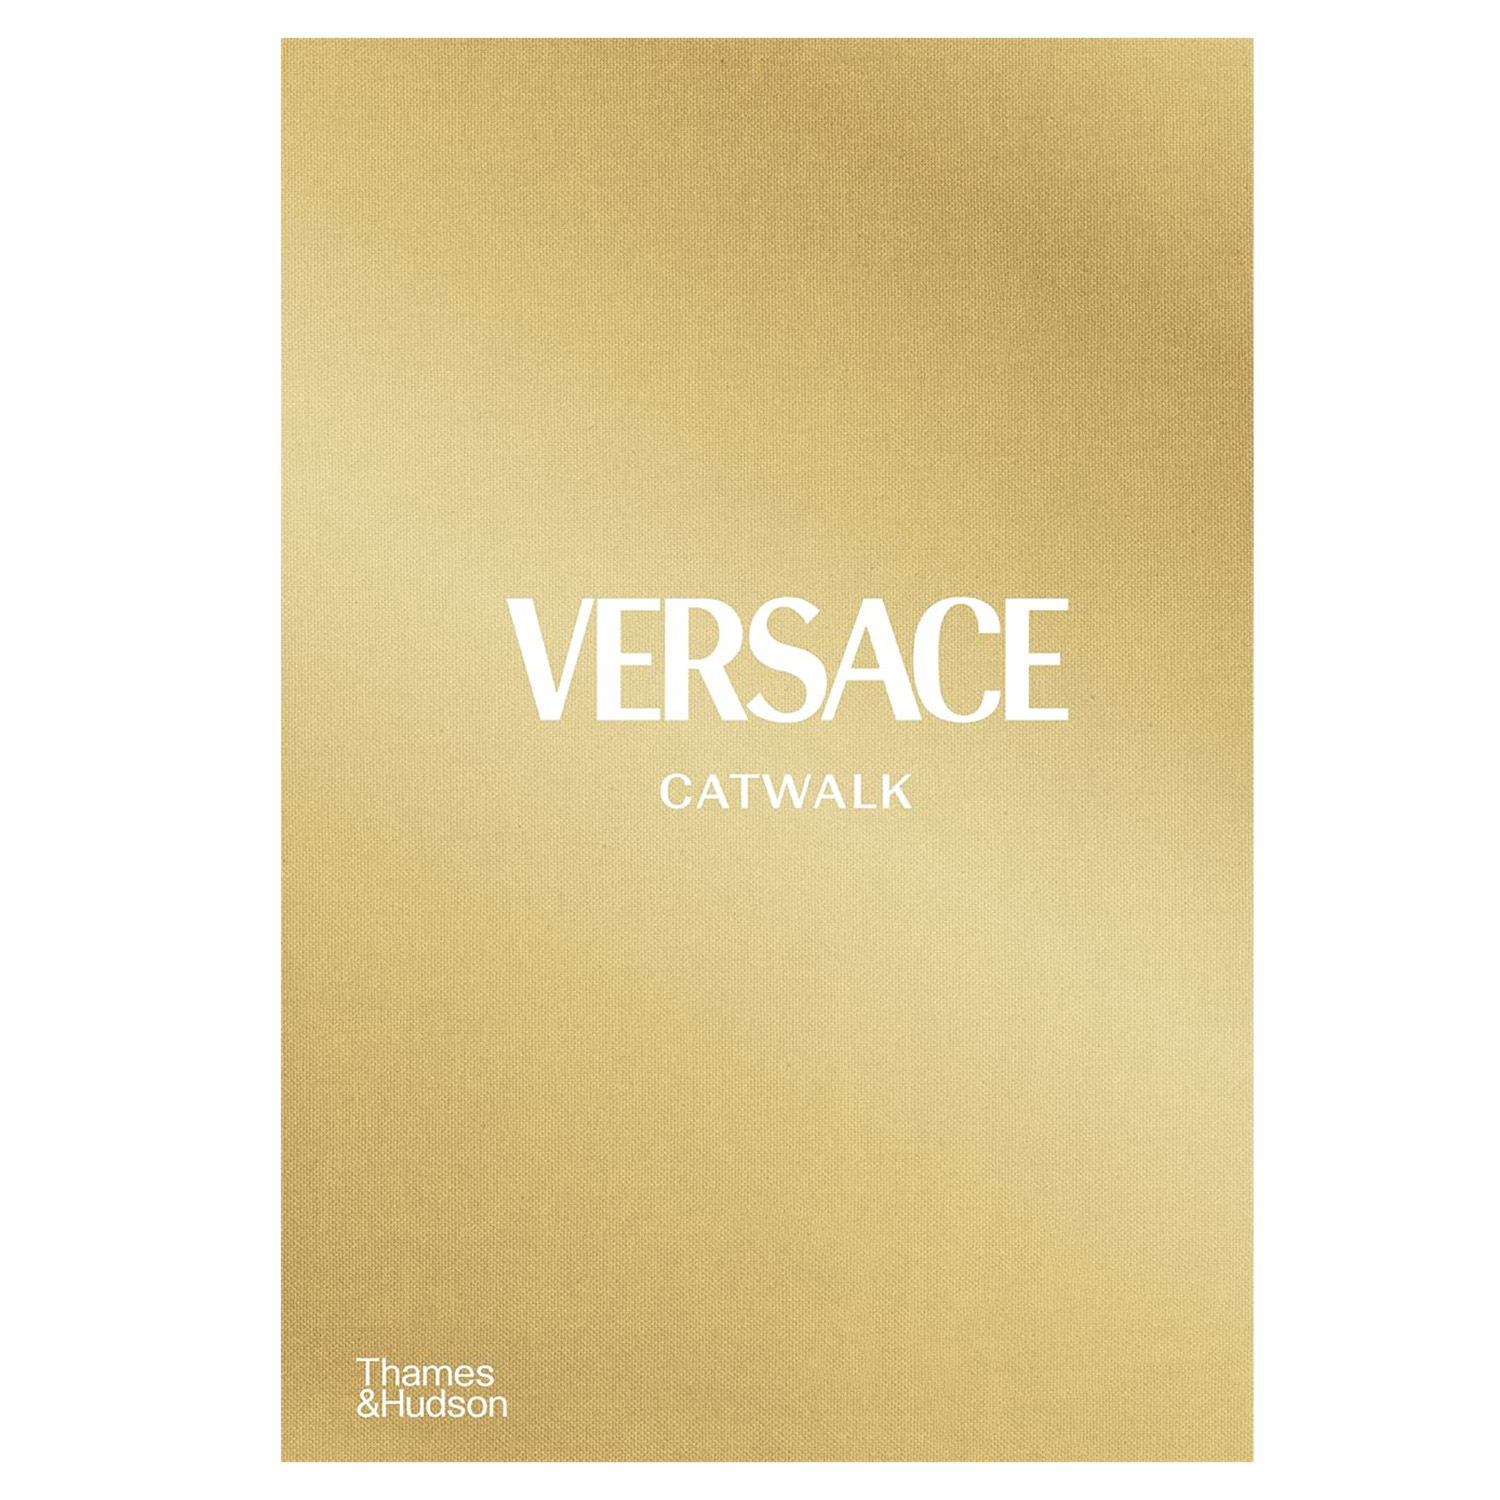 Thames & Hudson - Only 2 weeks to go until the release of 'Versace